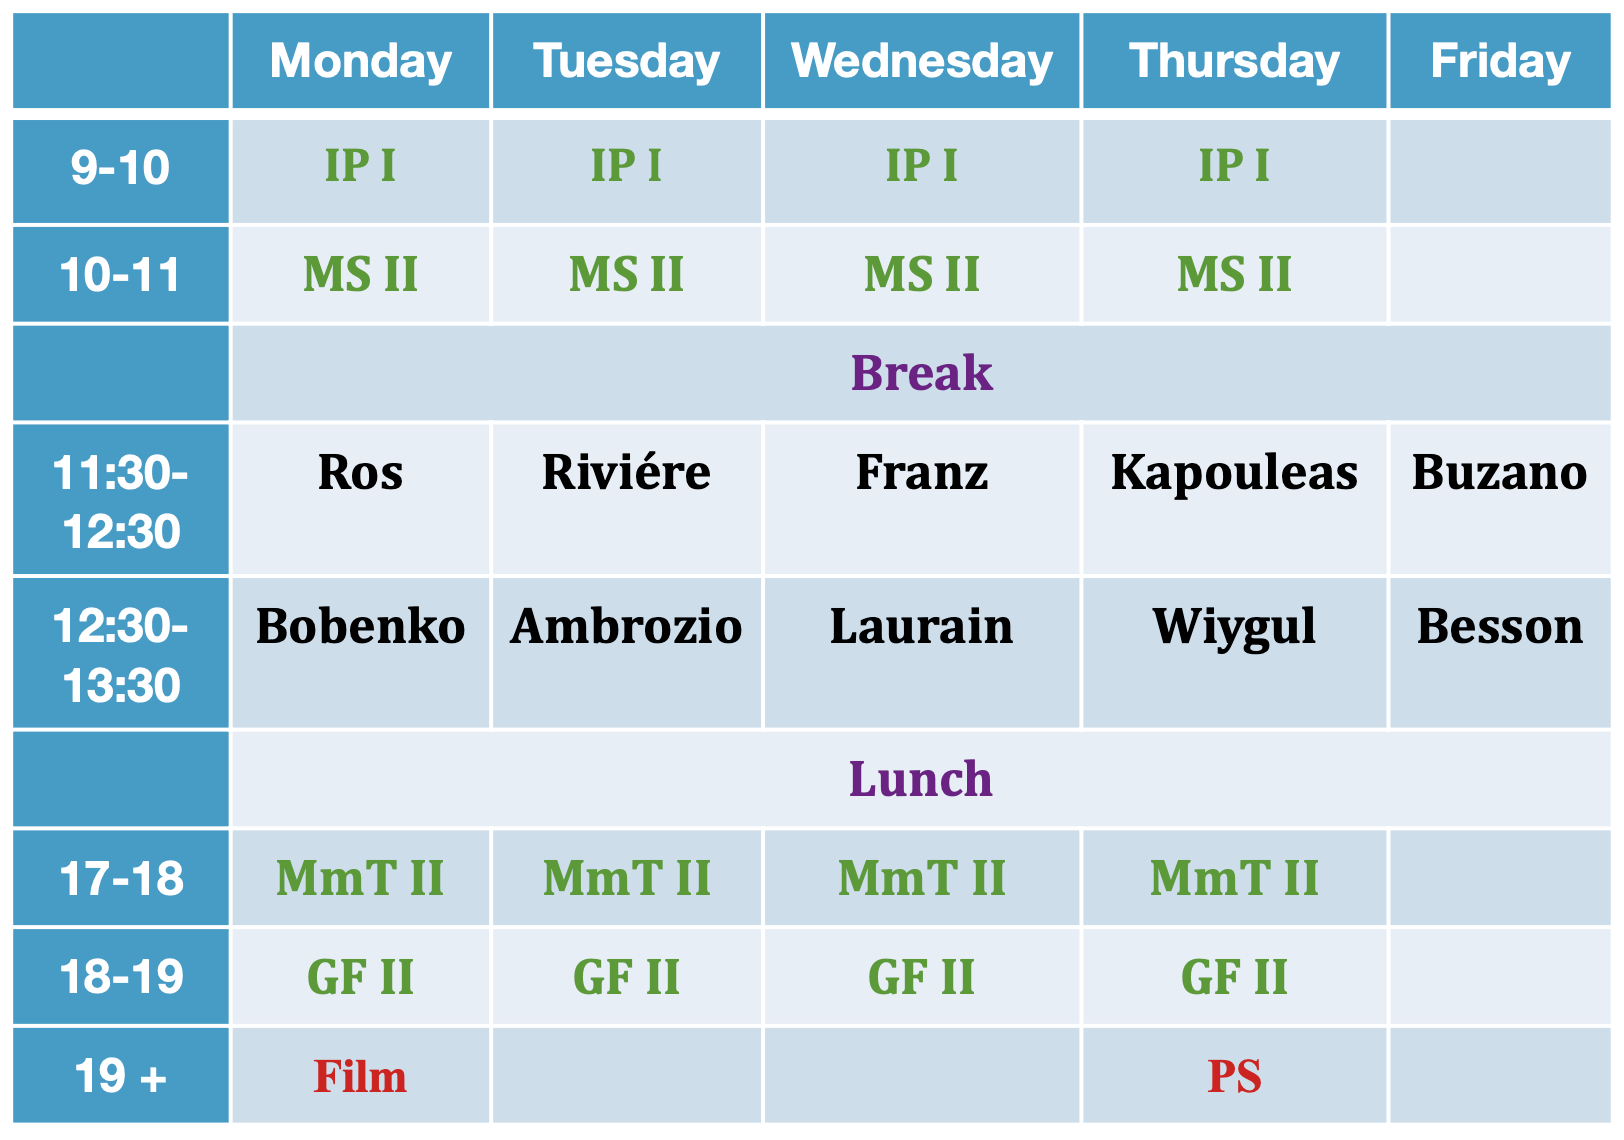 Tentative schedule for the second week